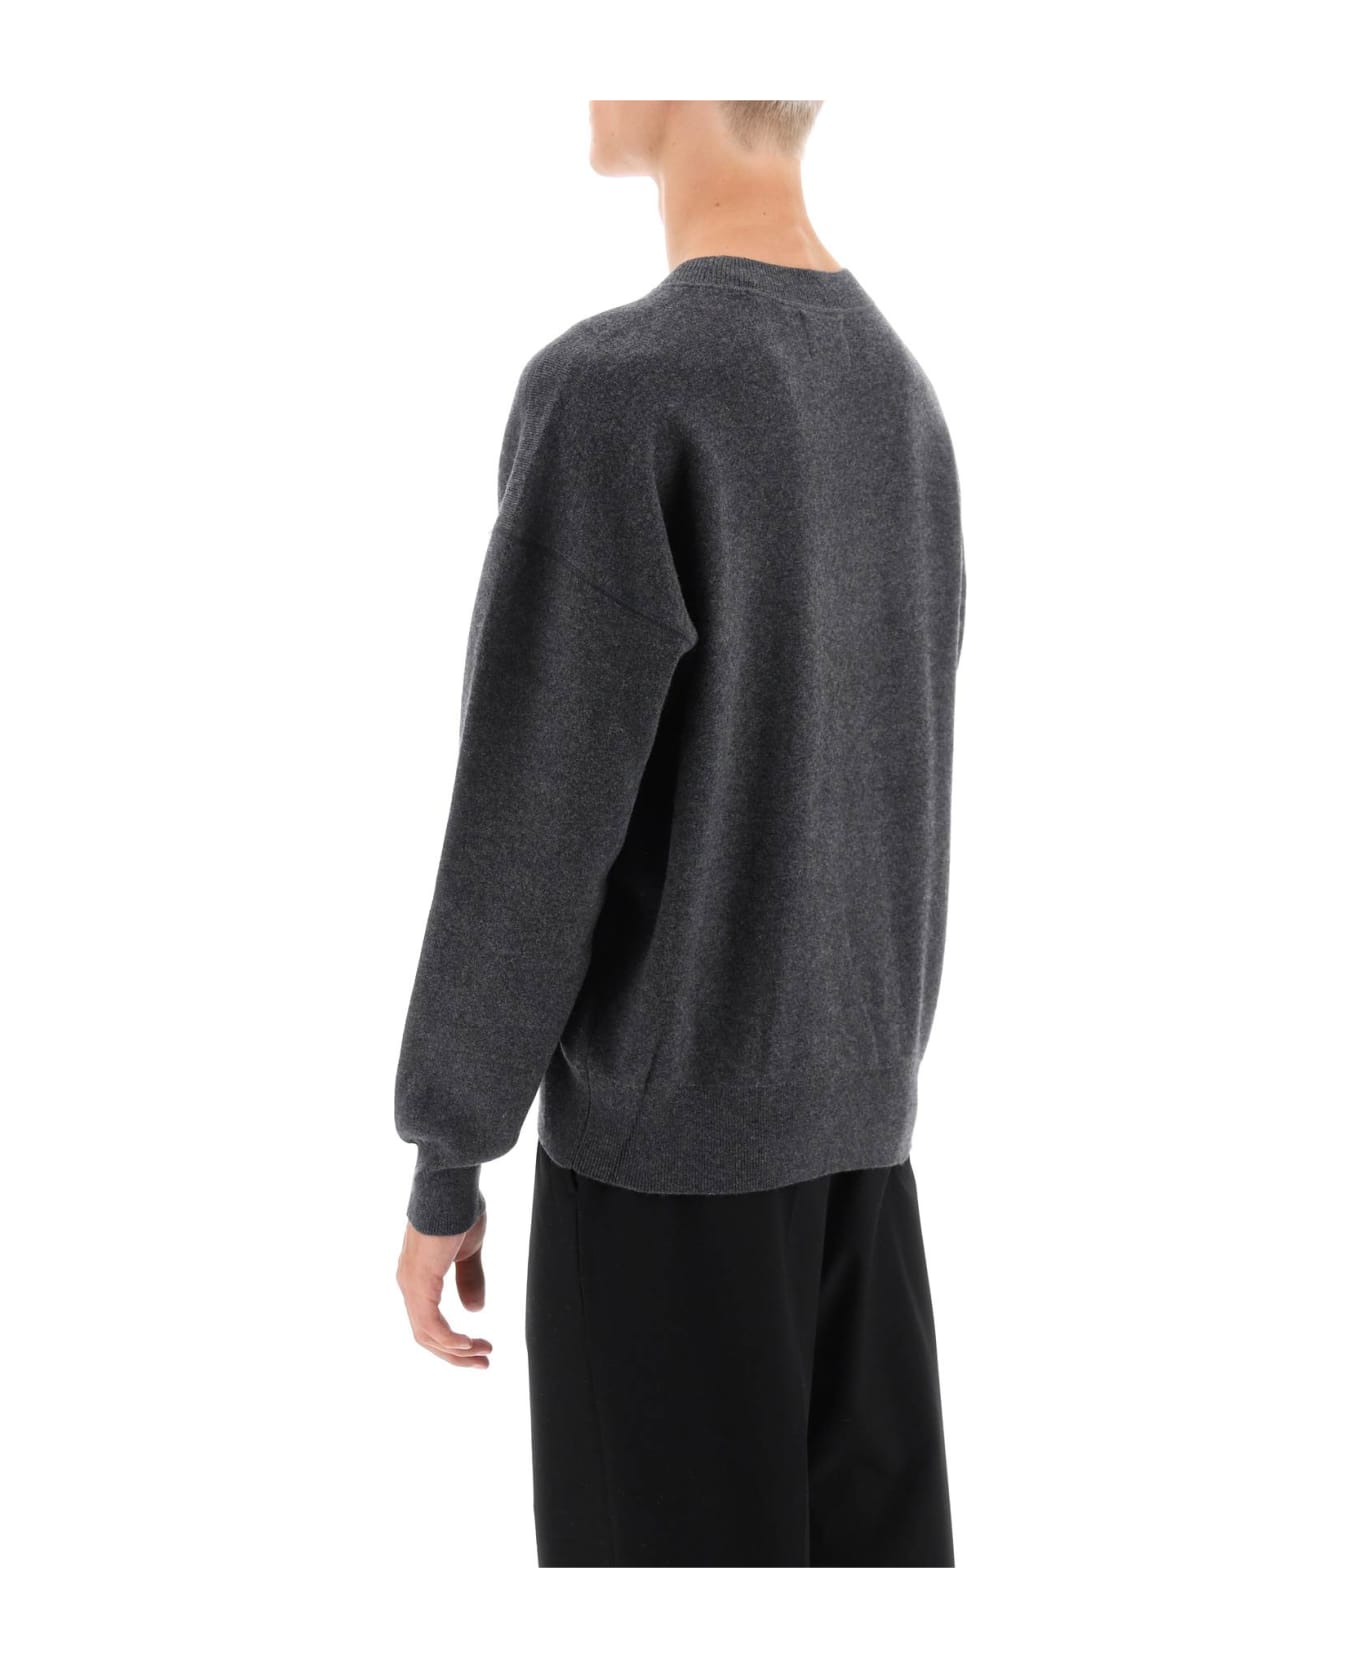 Isabel Marant Atley Pullover - An Anthracite